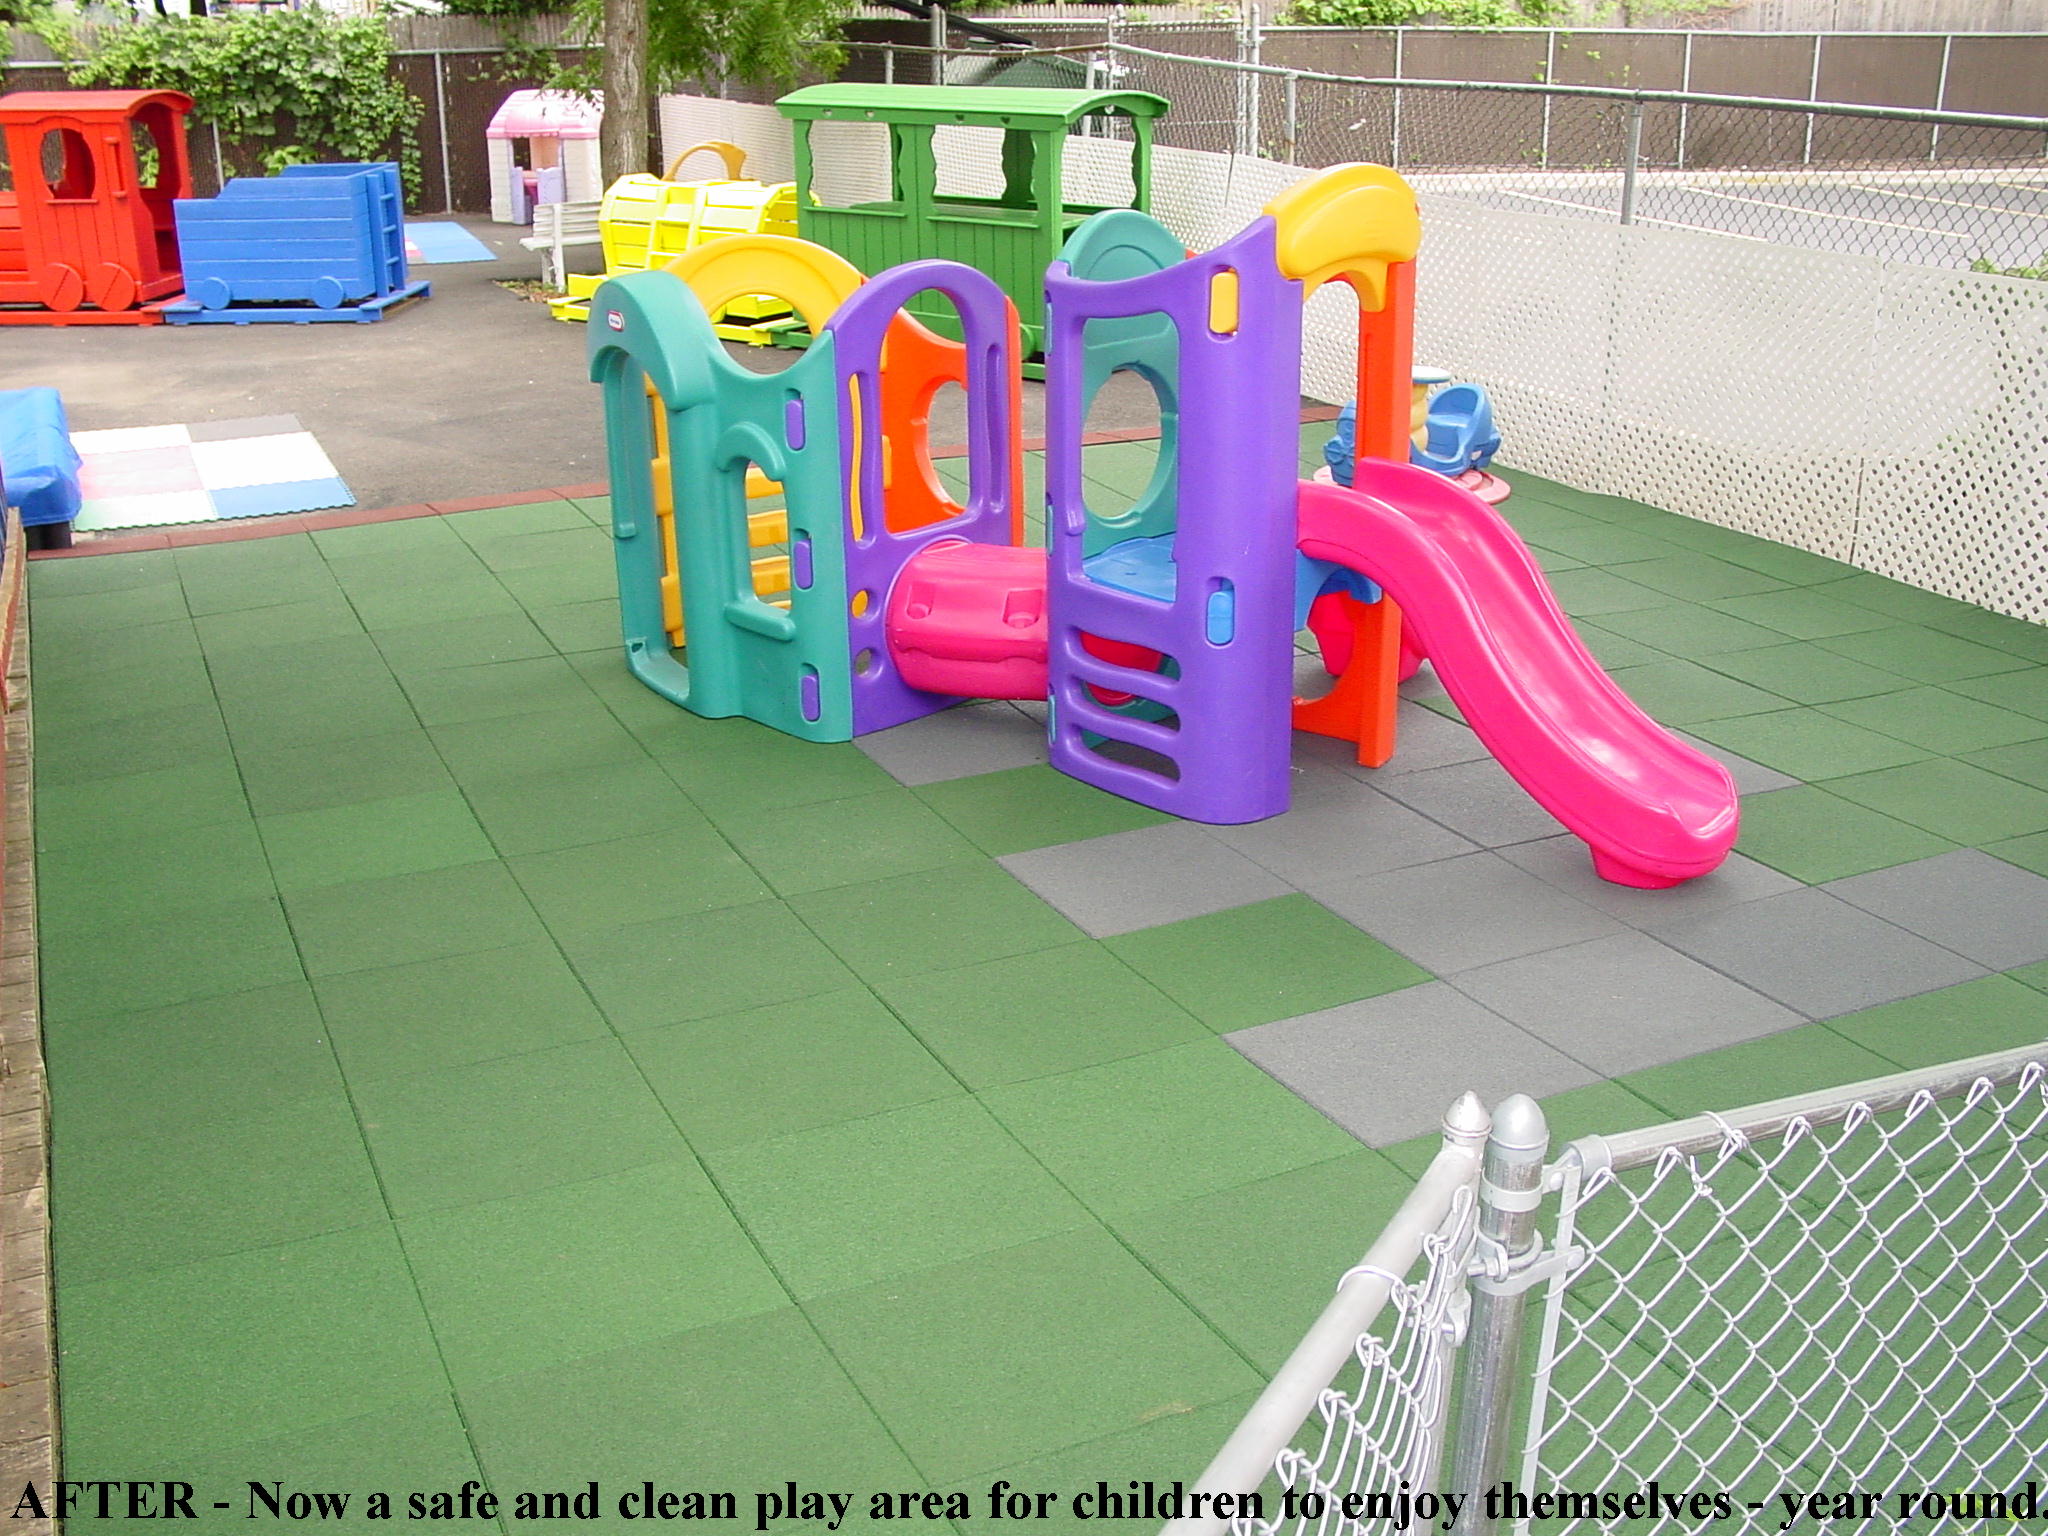 Daycare Center Using Pave-Land With Designs b